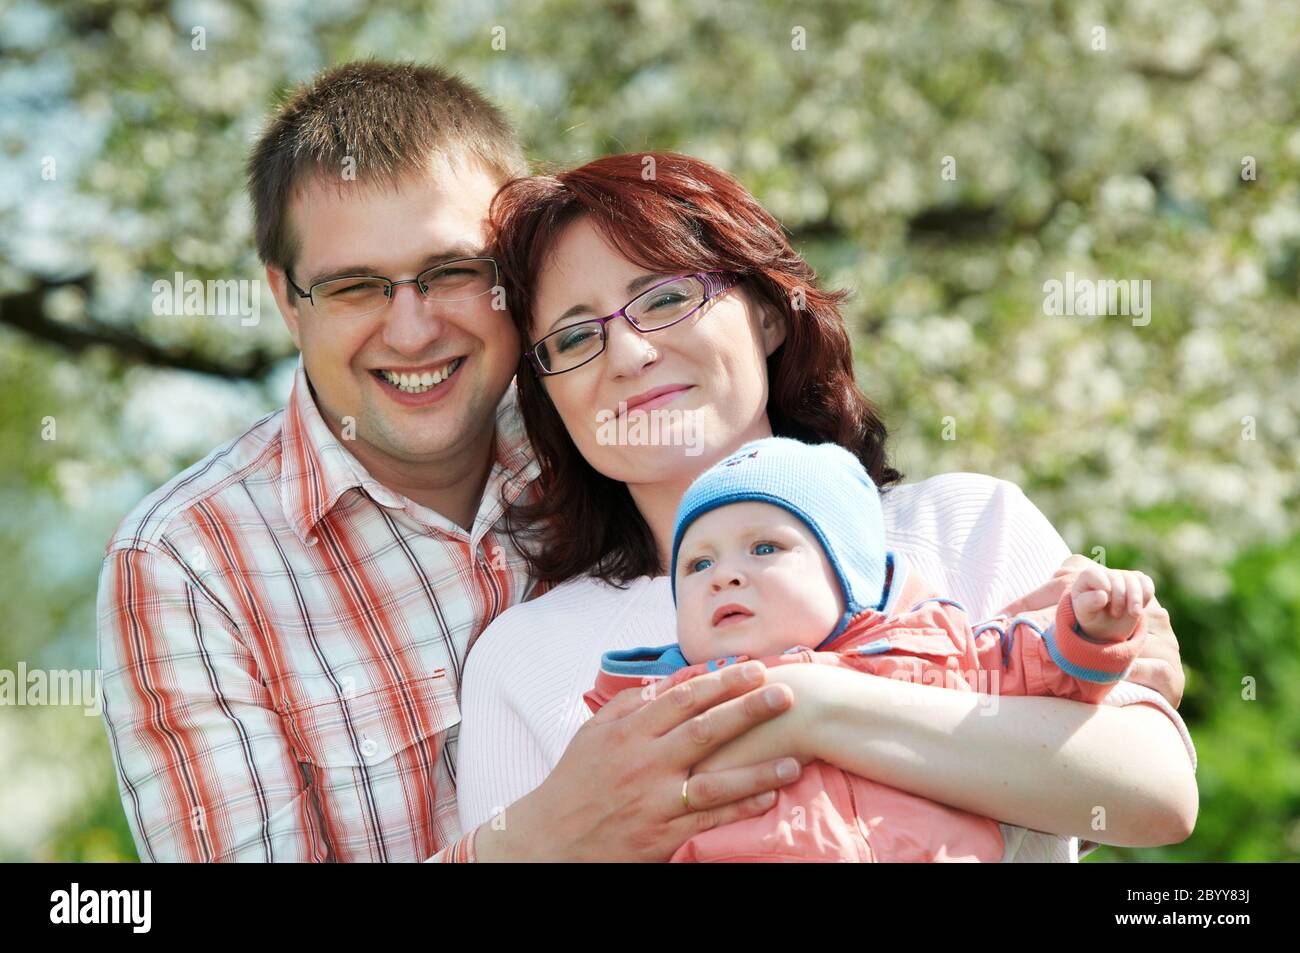 happy family at spring outdoors Stock Photo